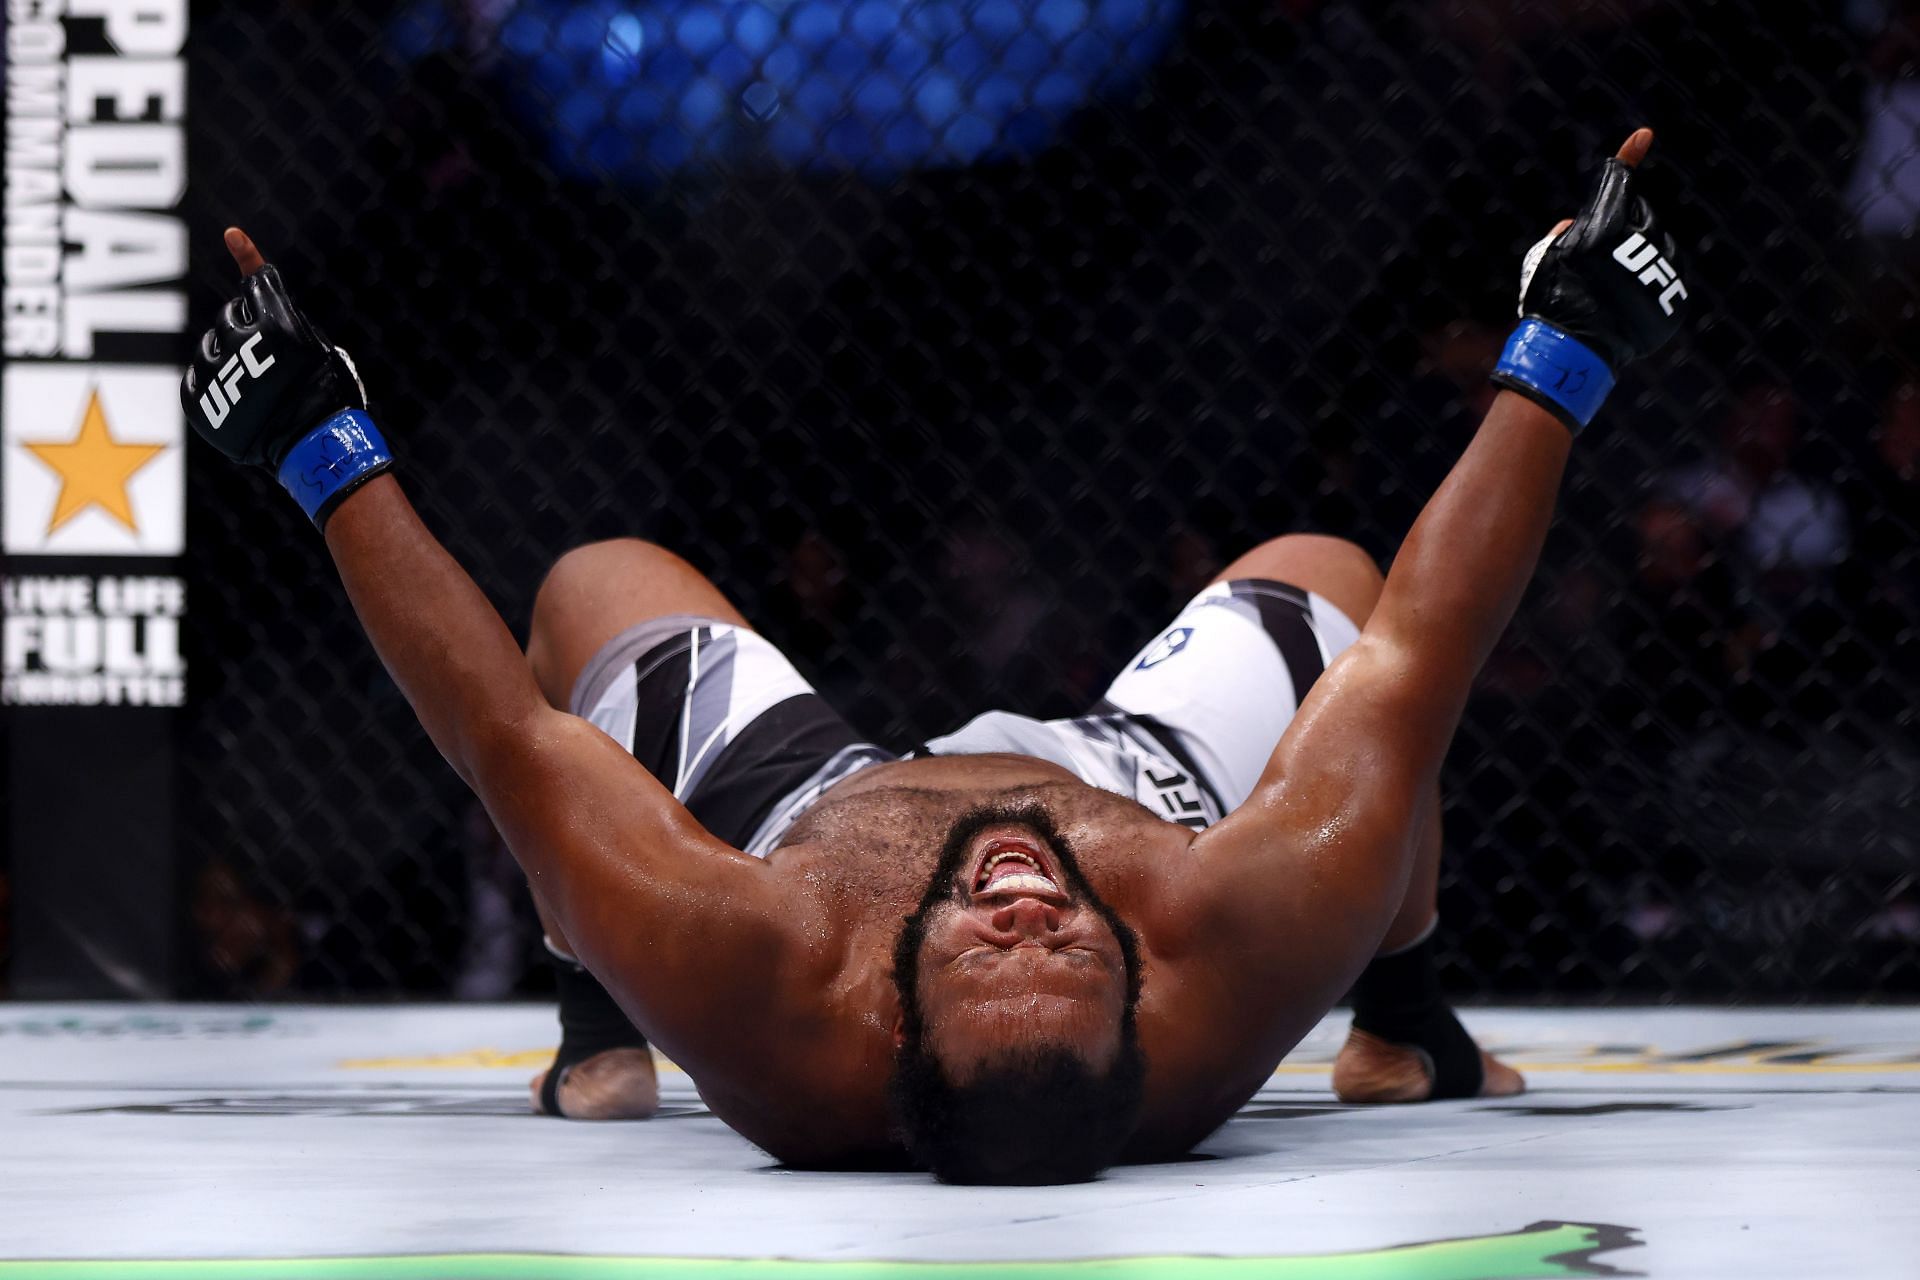 Chris Barnett pulled off a genuinely stunning wheel kick to knock out Gian Villante